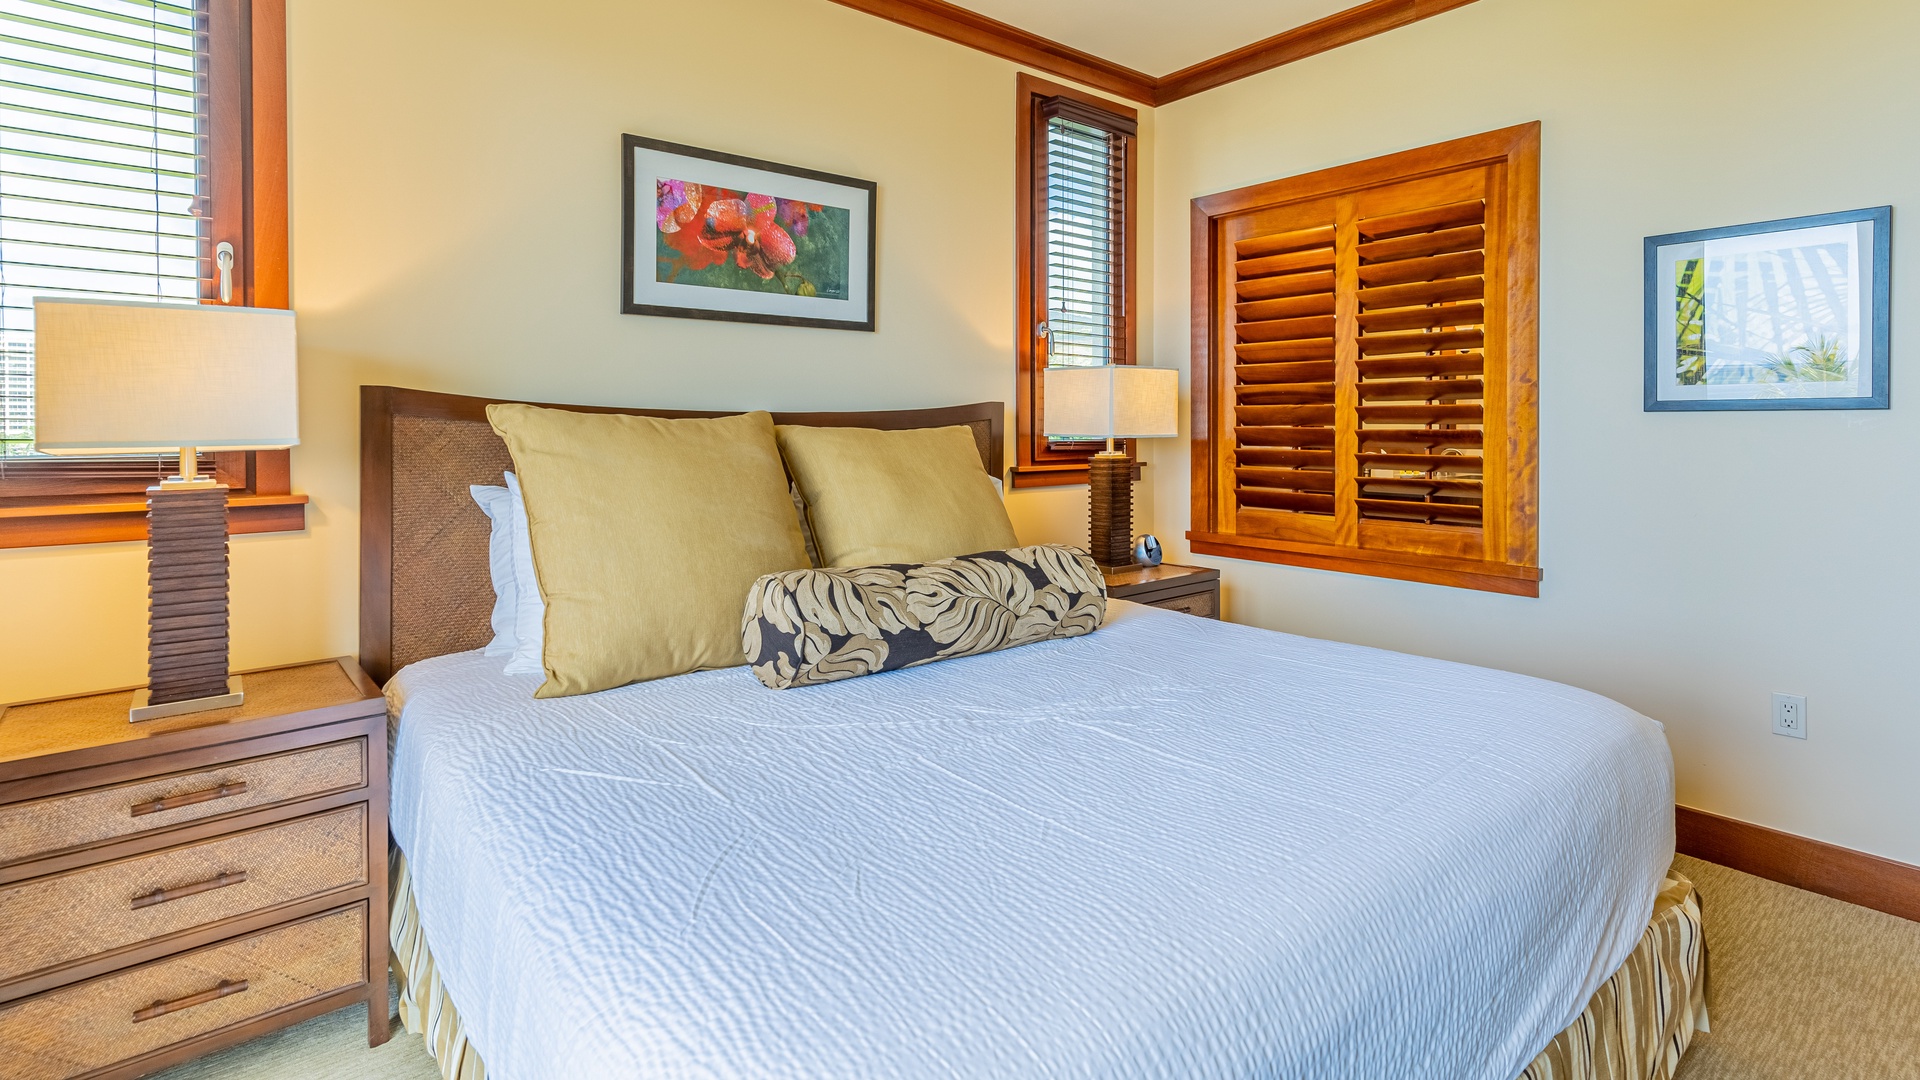 Kapolei Vacation Rentals, Ko Olina Beach Villas B410 - The beautiful primary guest bedroom. There is also a primary guest bathroom.